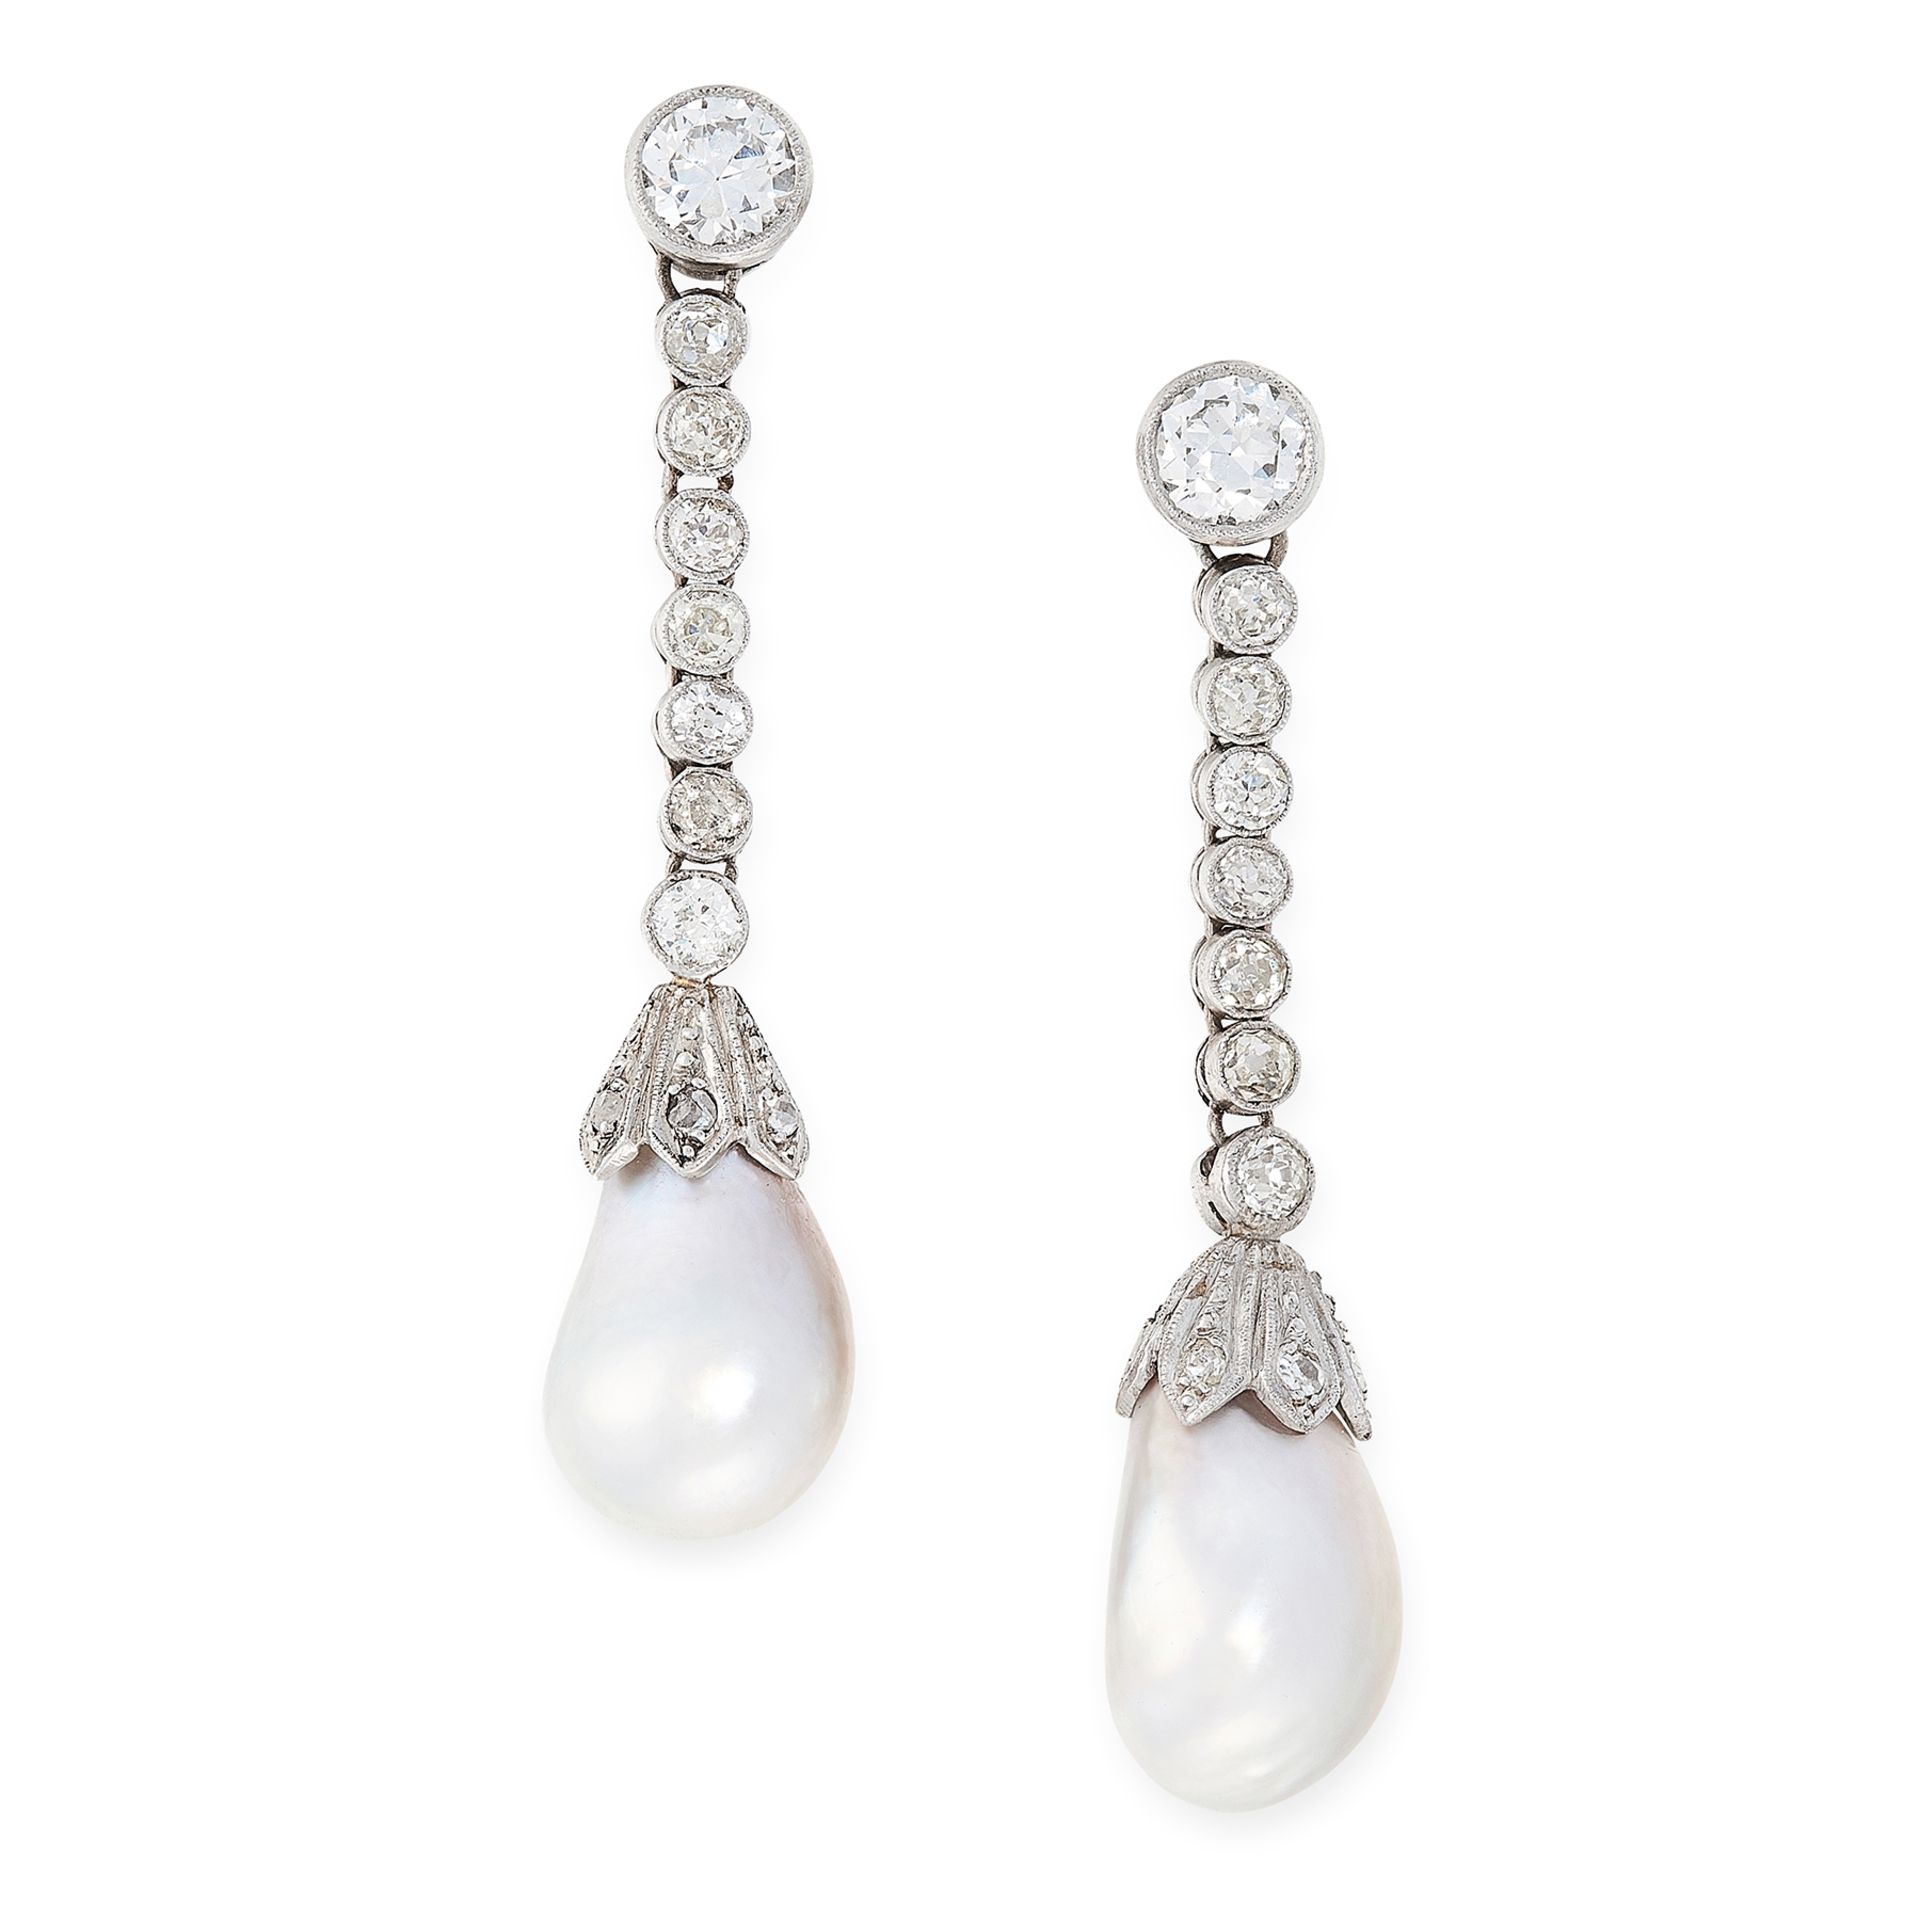 A PAIR OF NATURAL PEARL AND DIAMOND EARRINGS, EARLY 20TH CENTURY in 18ct white gold and platinum,